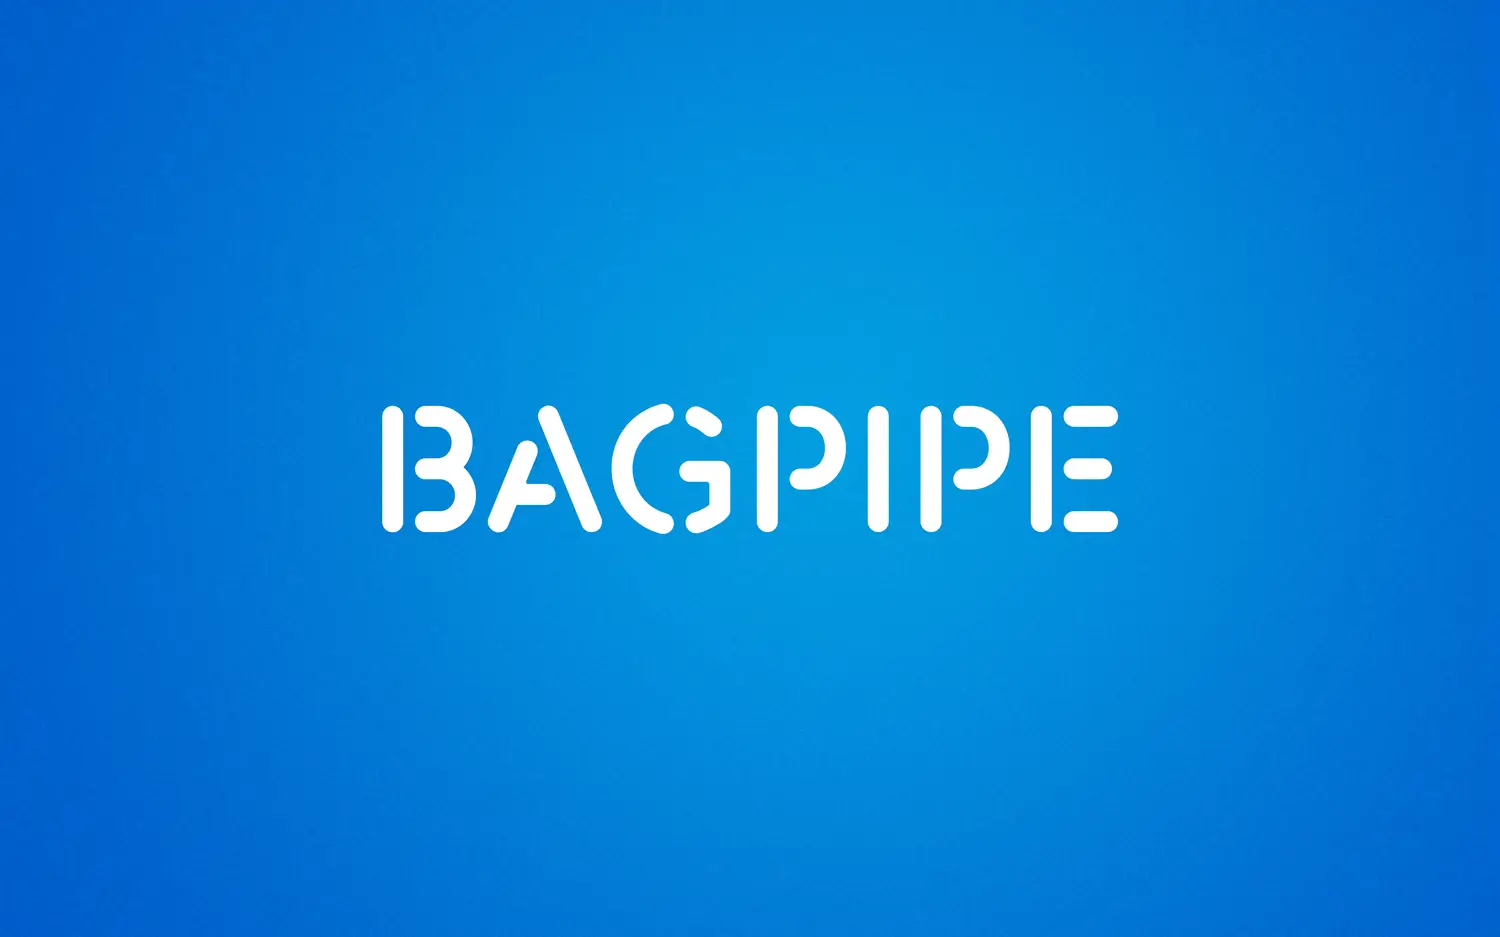 Bagpipe Typography Banner